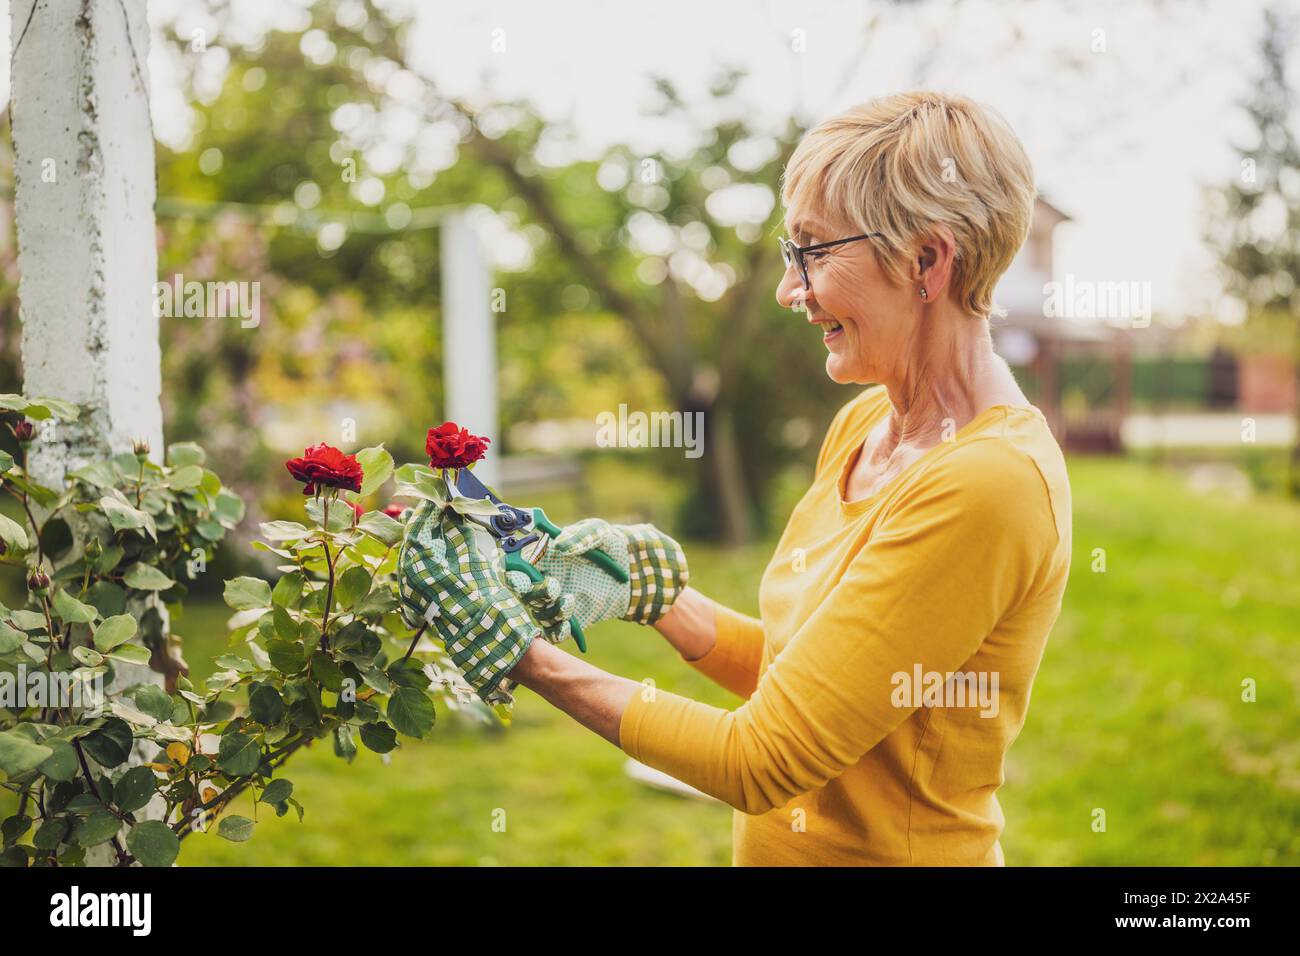 Portrait of happy senior woman gardening. She is pruning flowers. Stock Photo